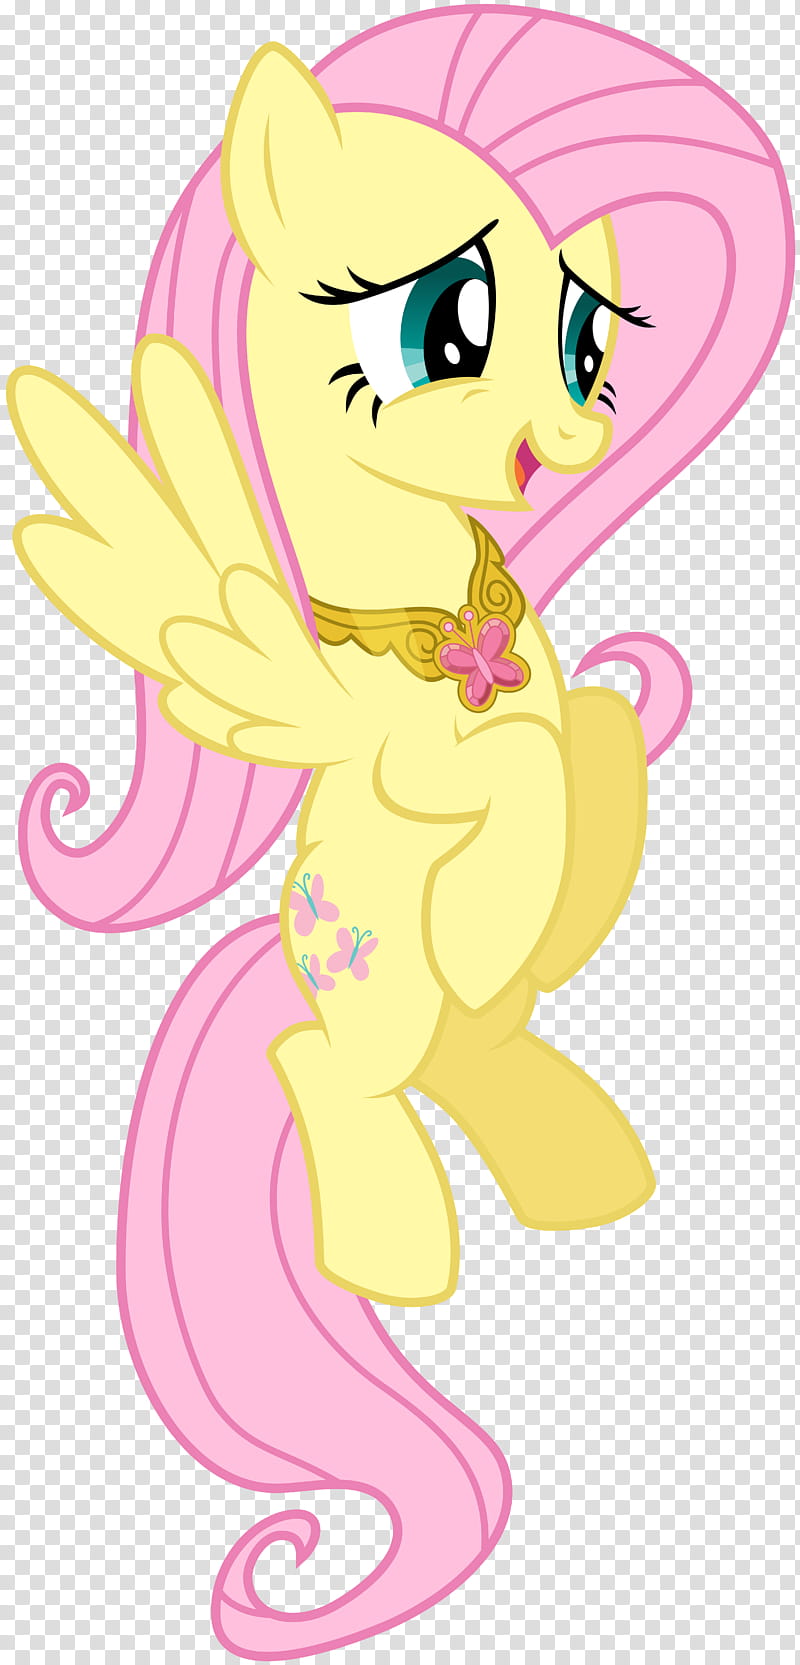 Fluttershy, pink and yellow My Little Pony character transparent background PNG clipart